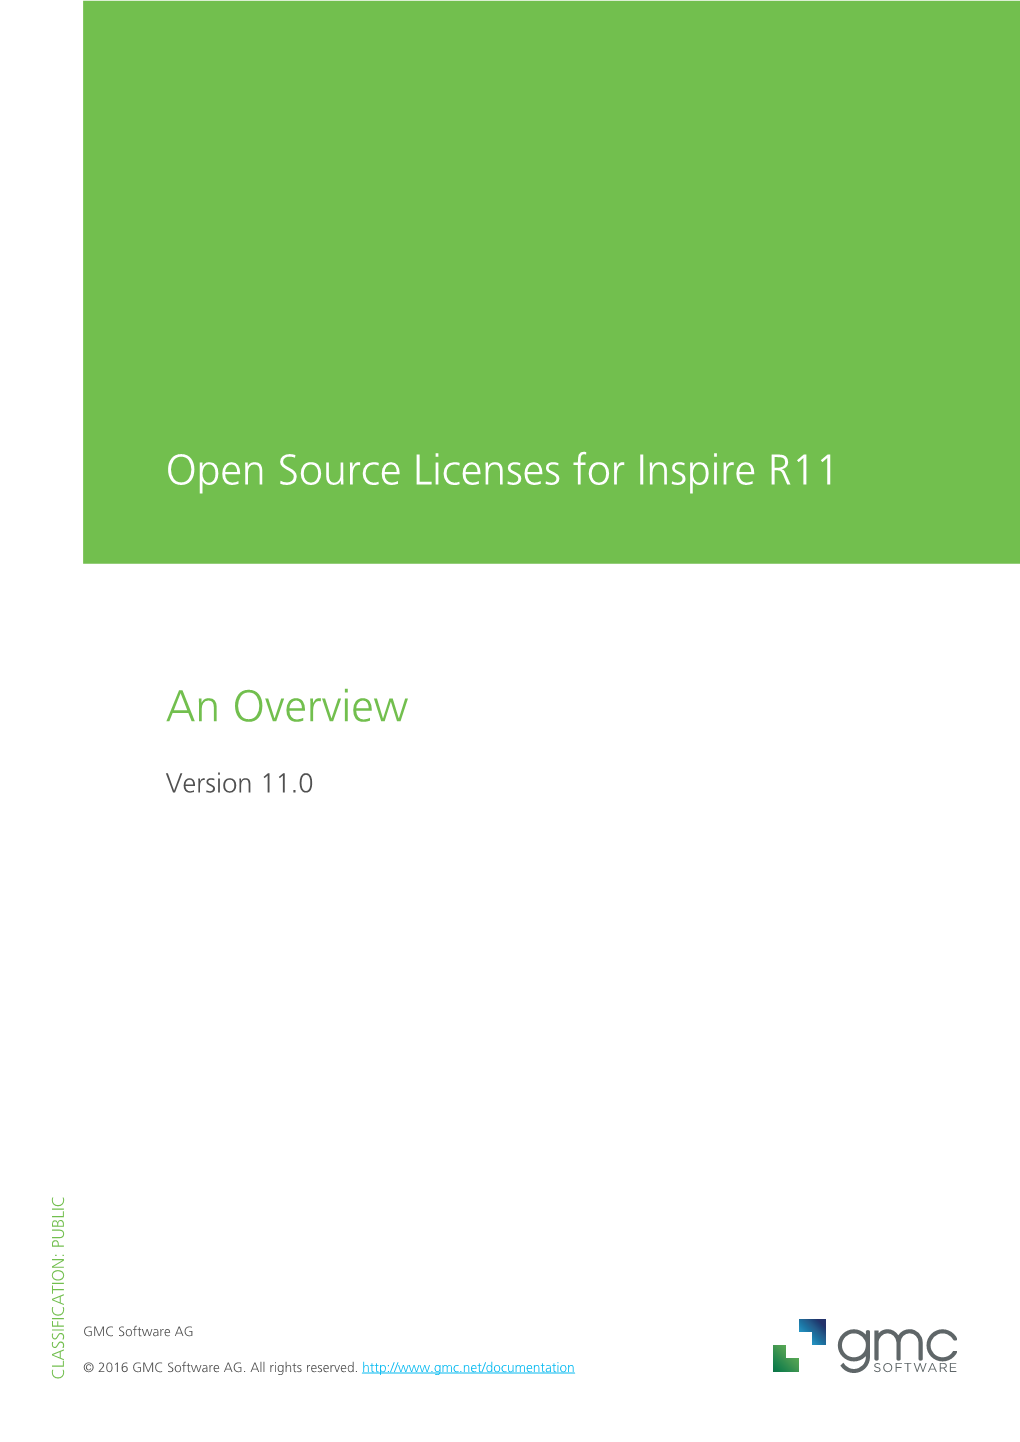 Open Source Licenses for Inspire R11